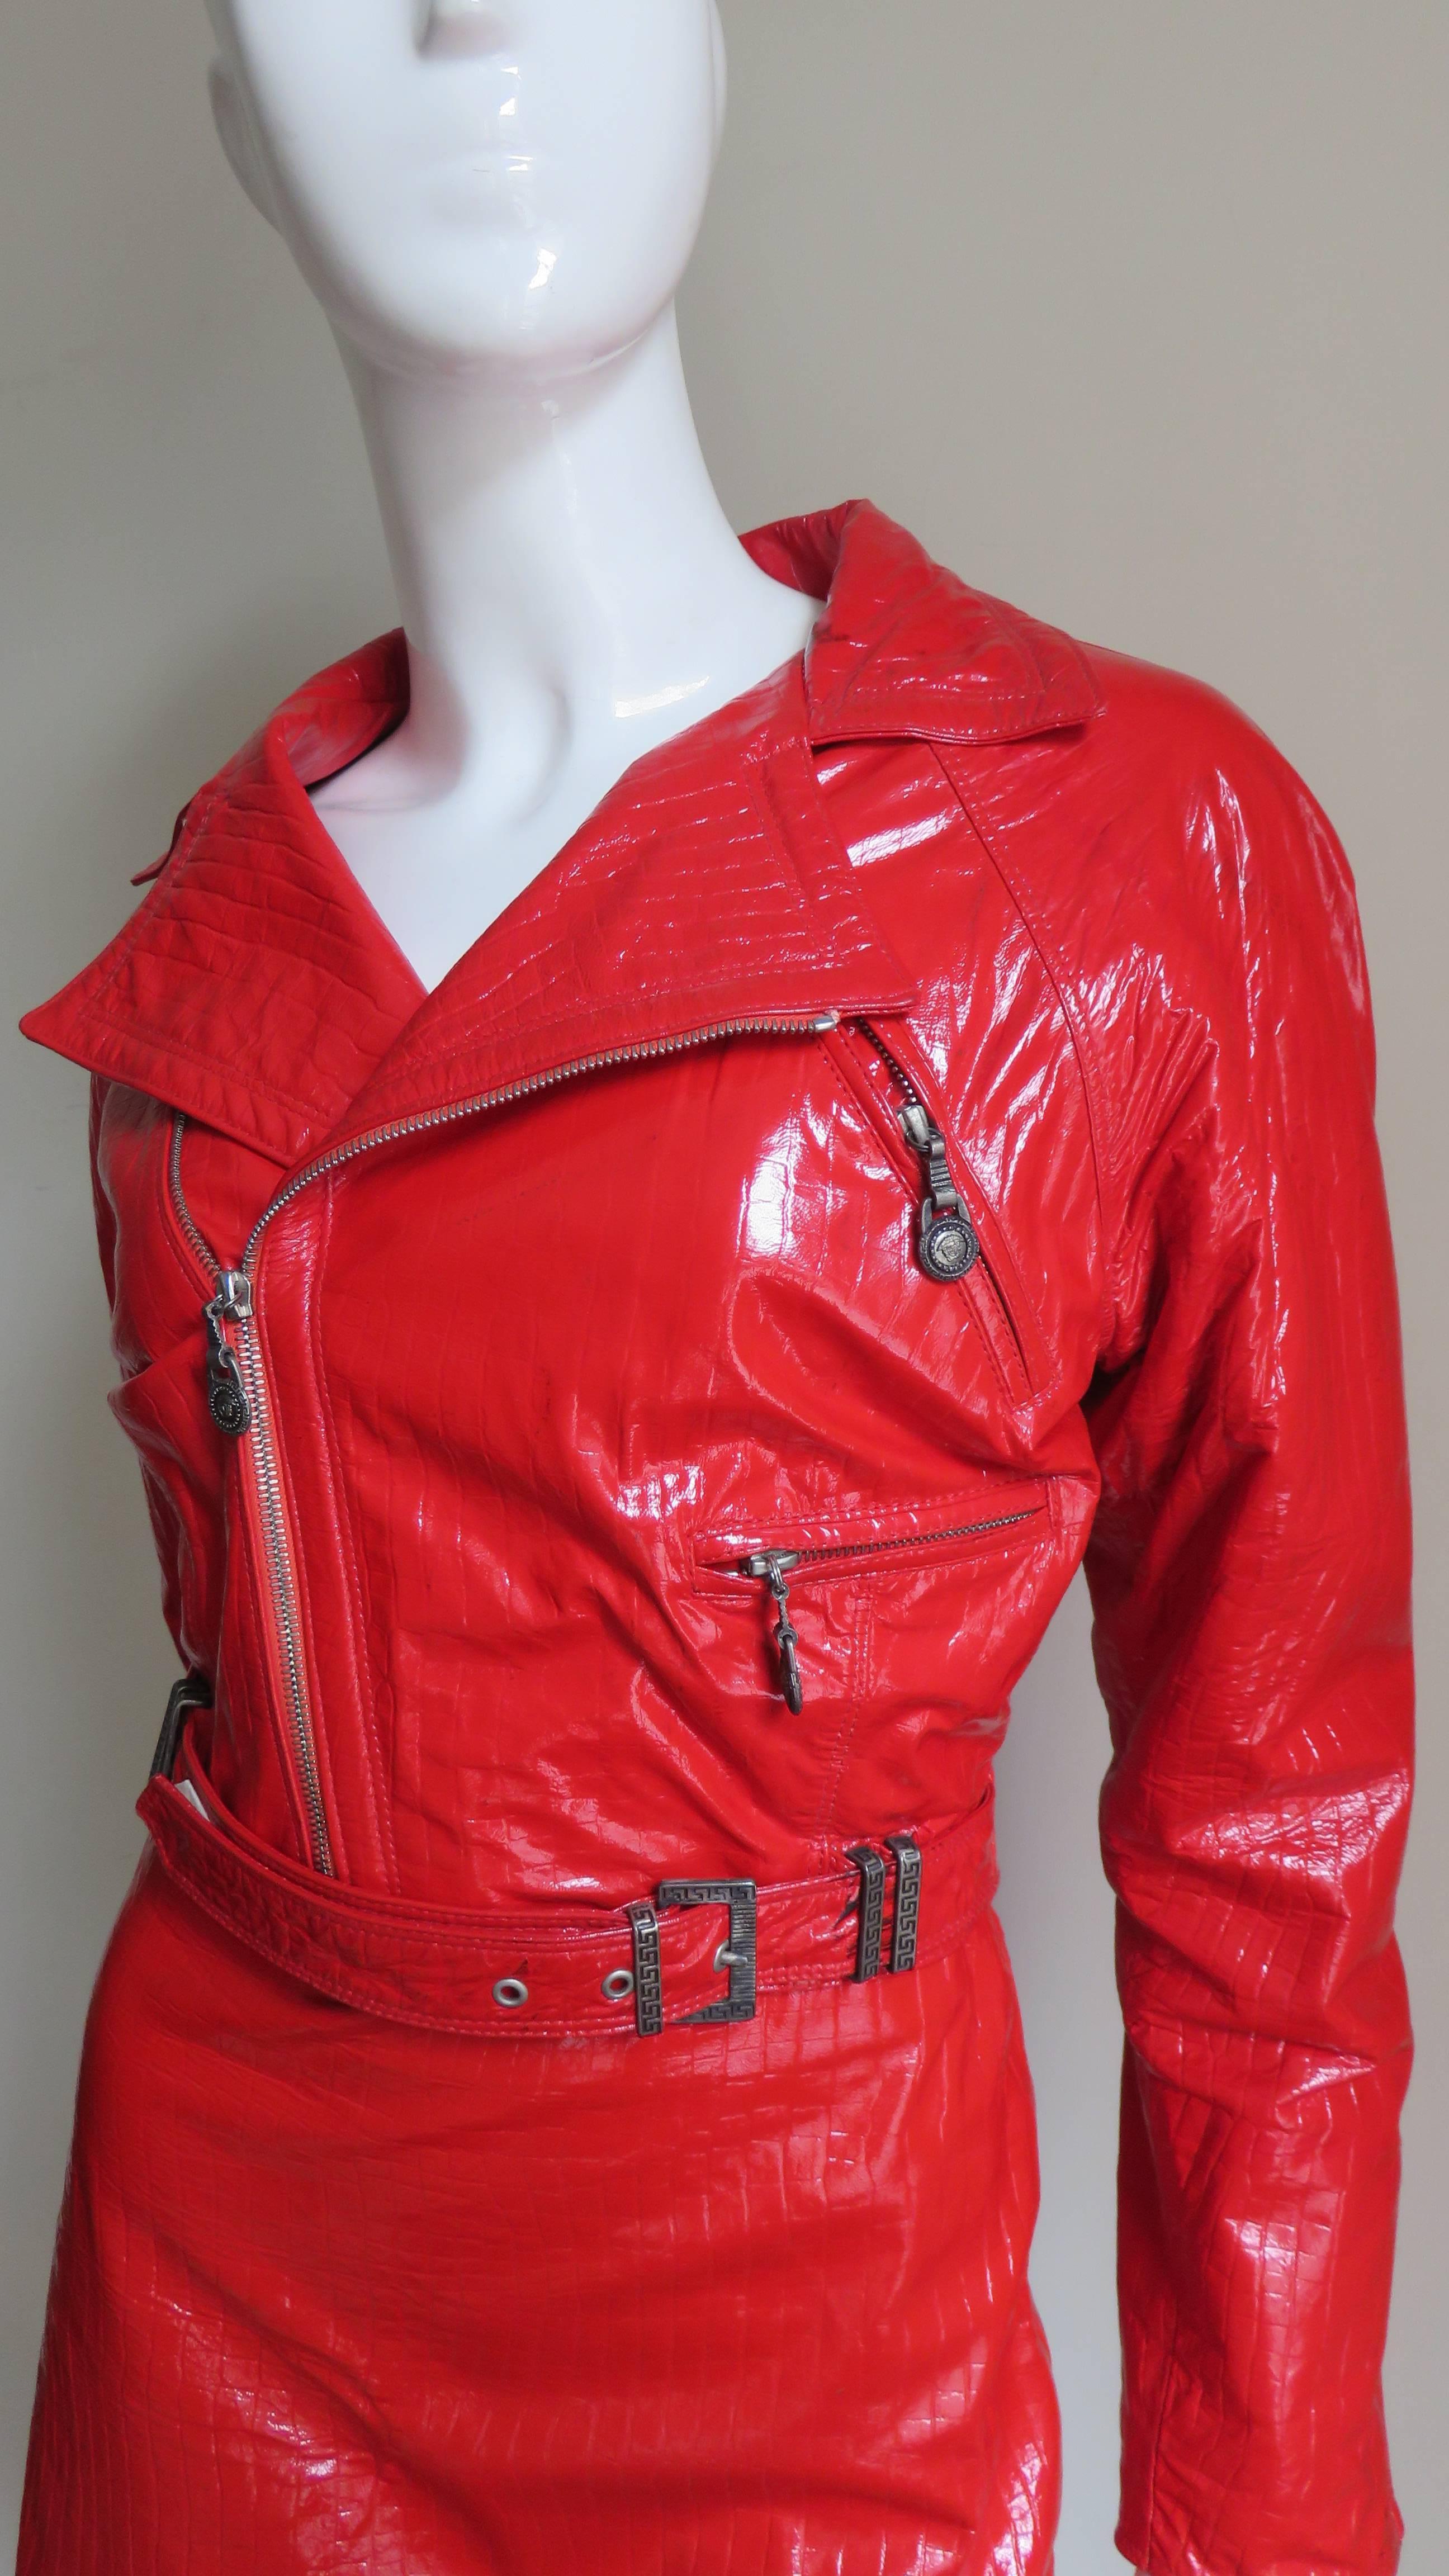 A fabulous and rare red patent leather motorcycle jacket with matching skirt from Gianni Versace. It has all of Versace's amazing attention to detail including Medusa head pulls on the center front zip, wrist zippers and 4 jacket front zipper